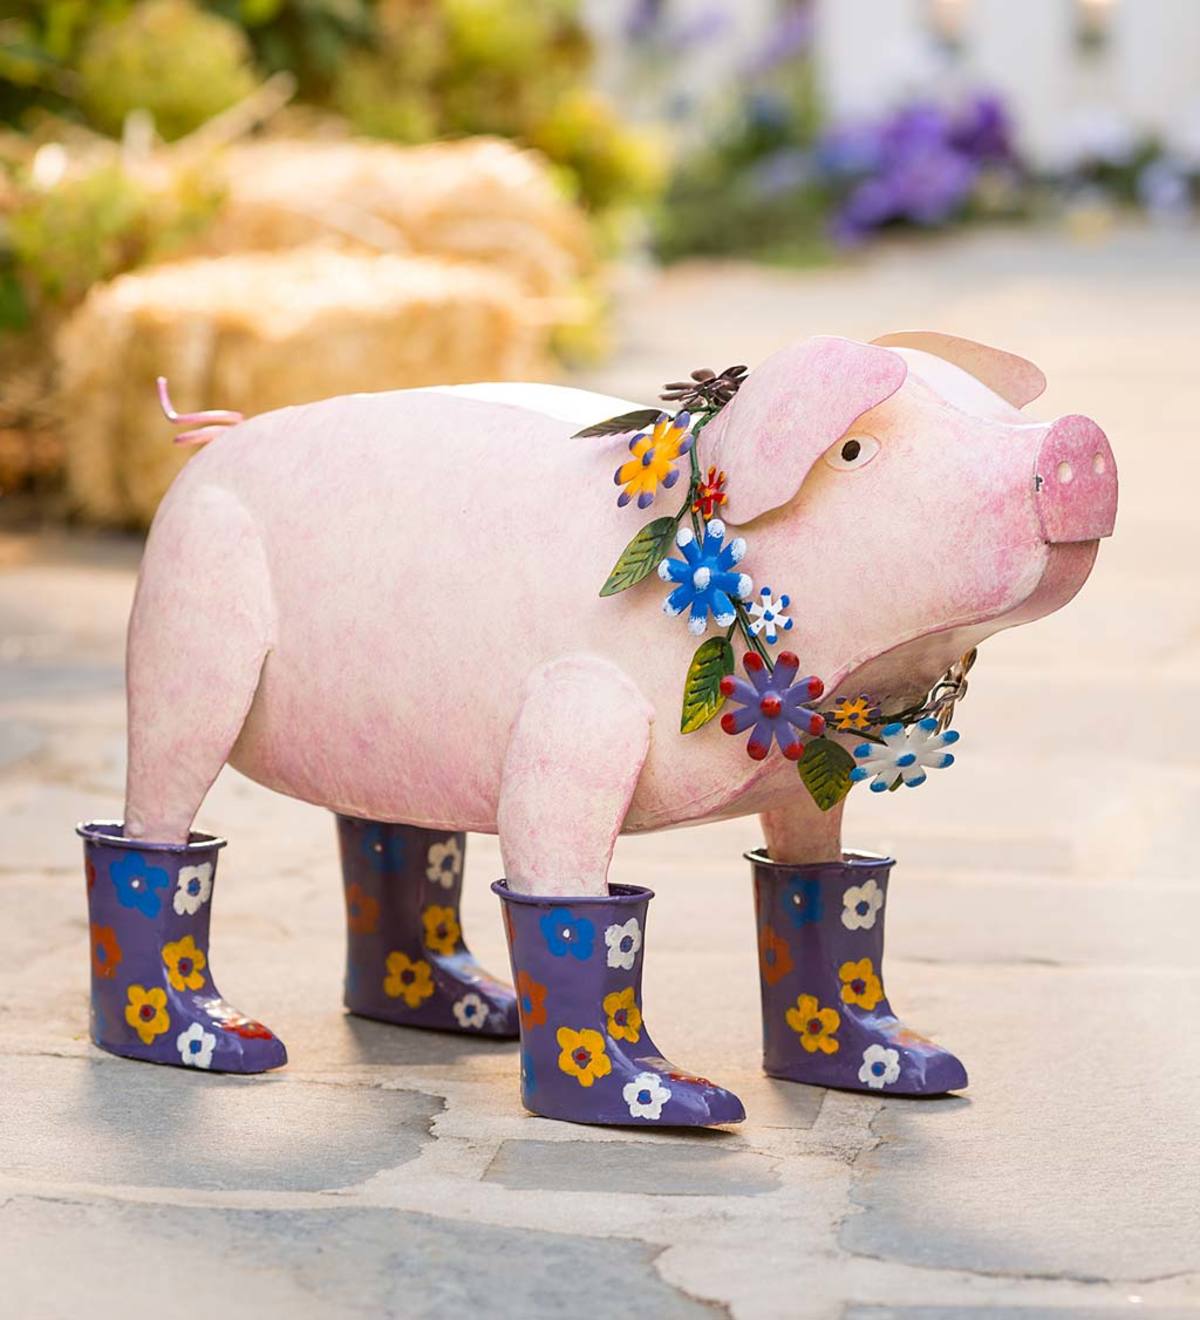 Handcrafted Metal Pig with Flowered Purple Rain Boots | Wind and Weather